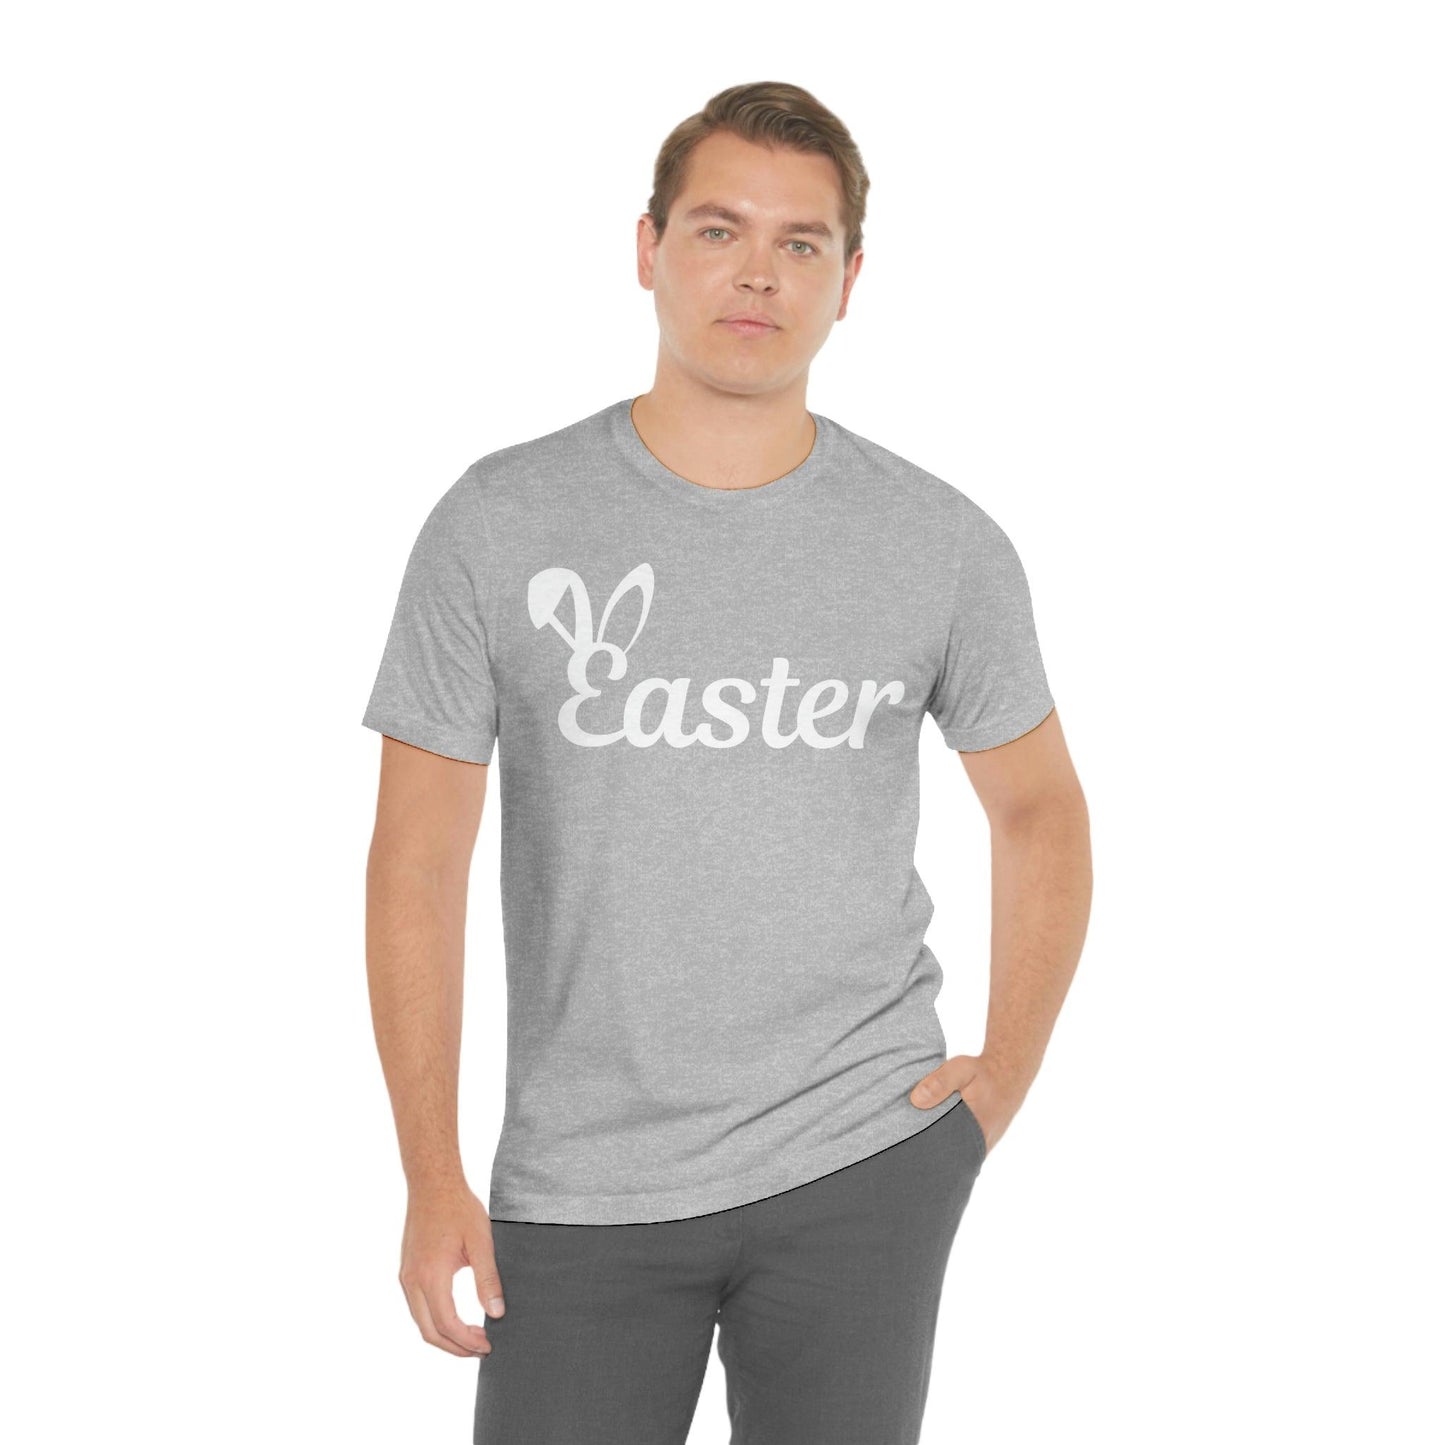 Funny Easter T shirt, Cute Easter Shirt for women and men